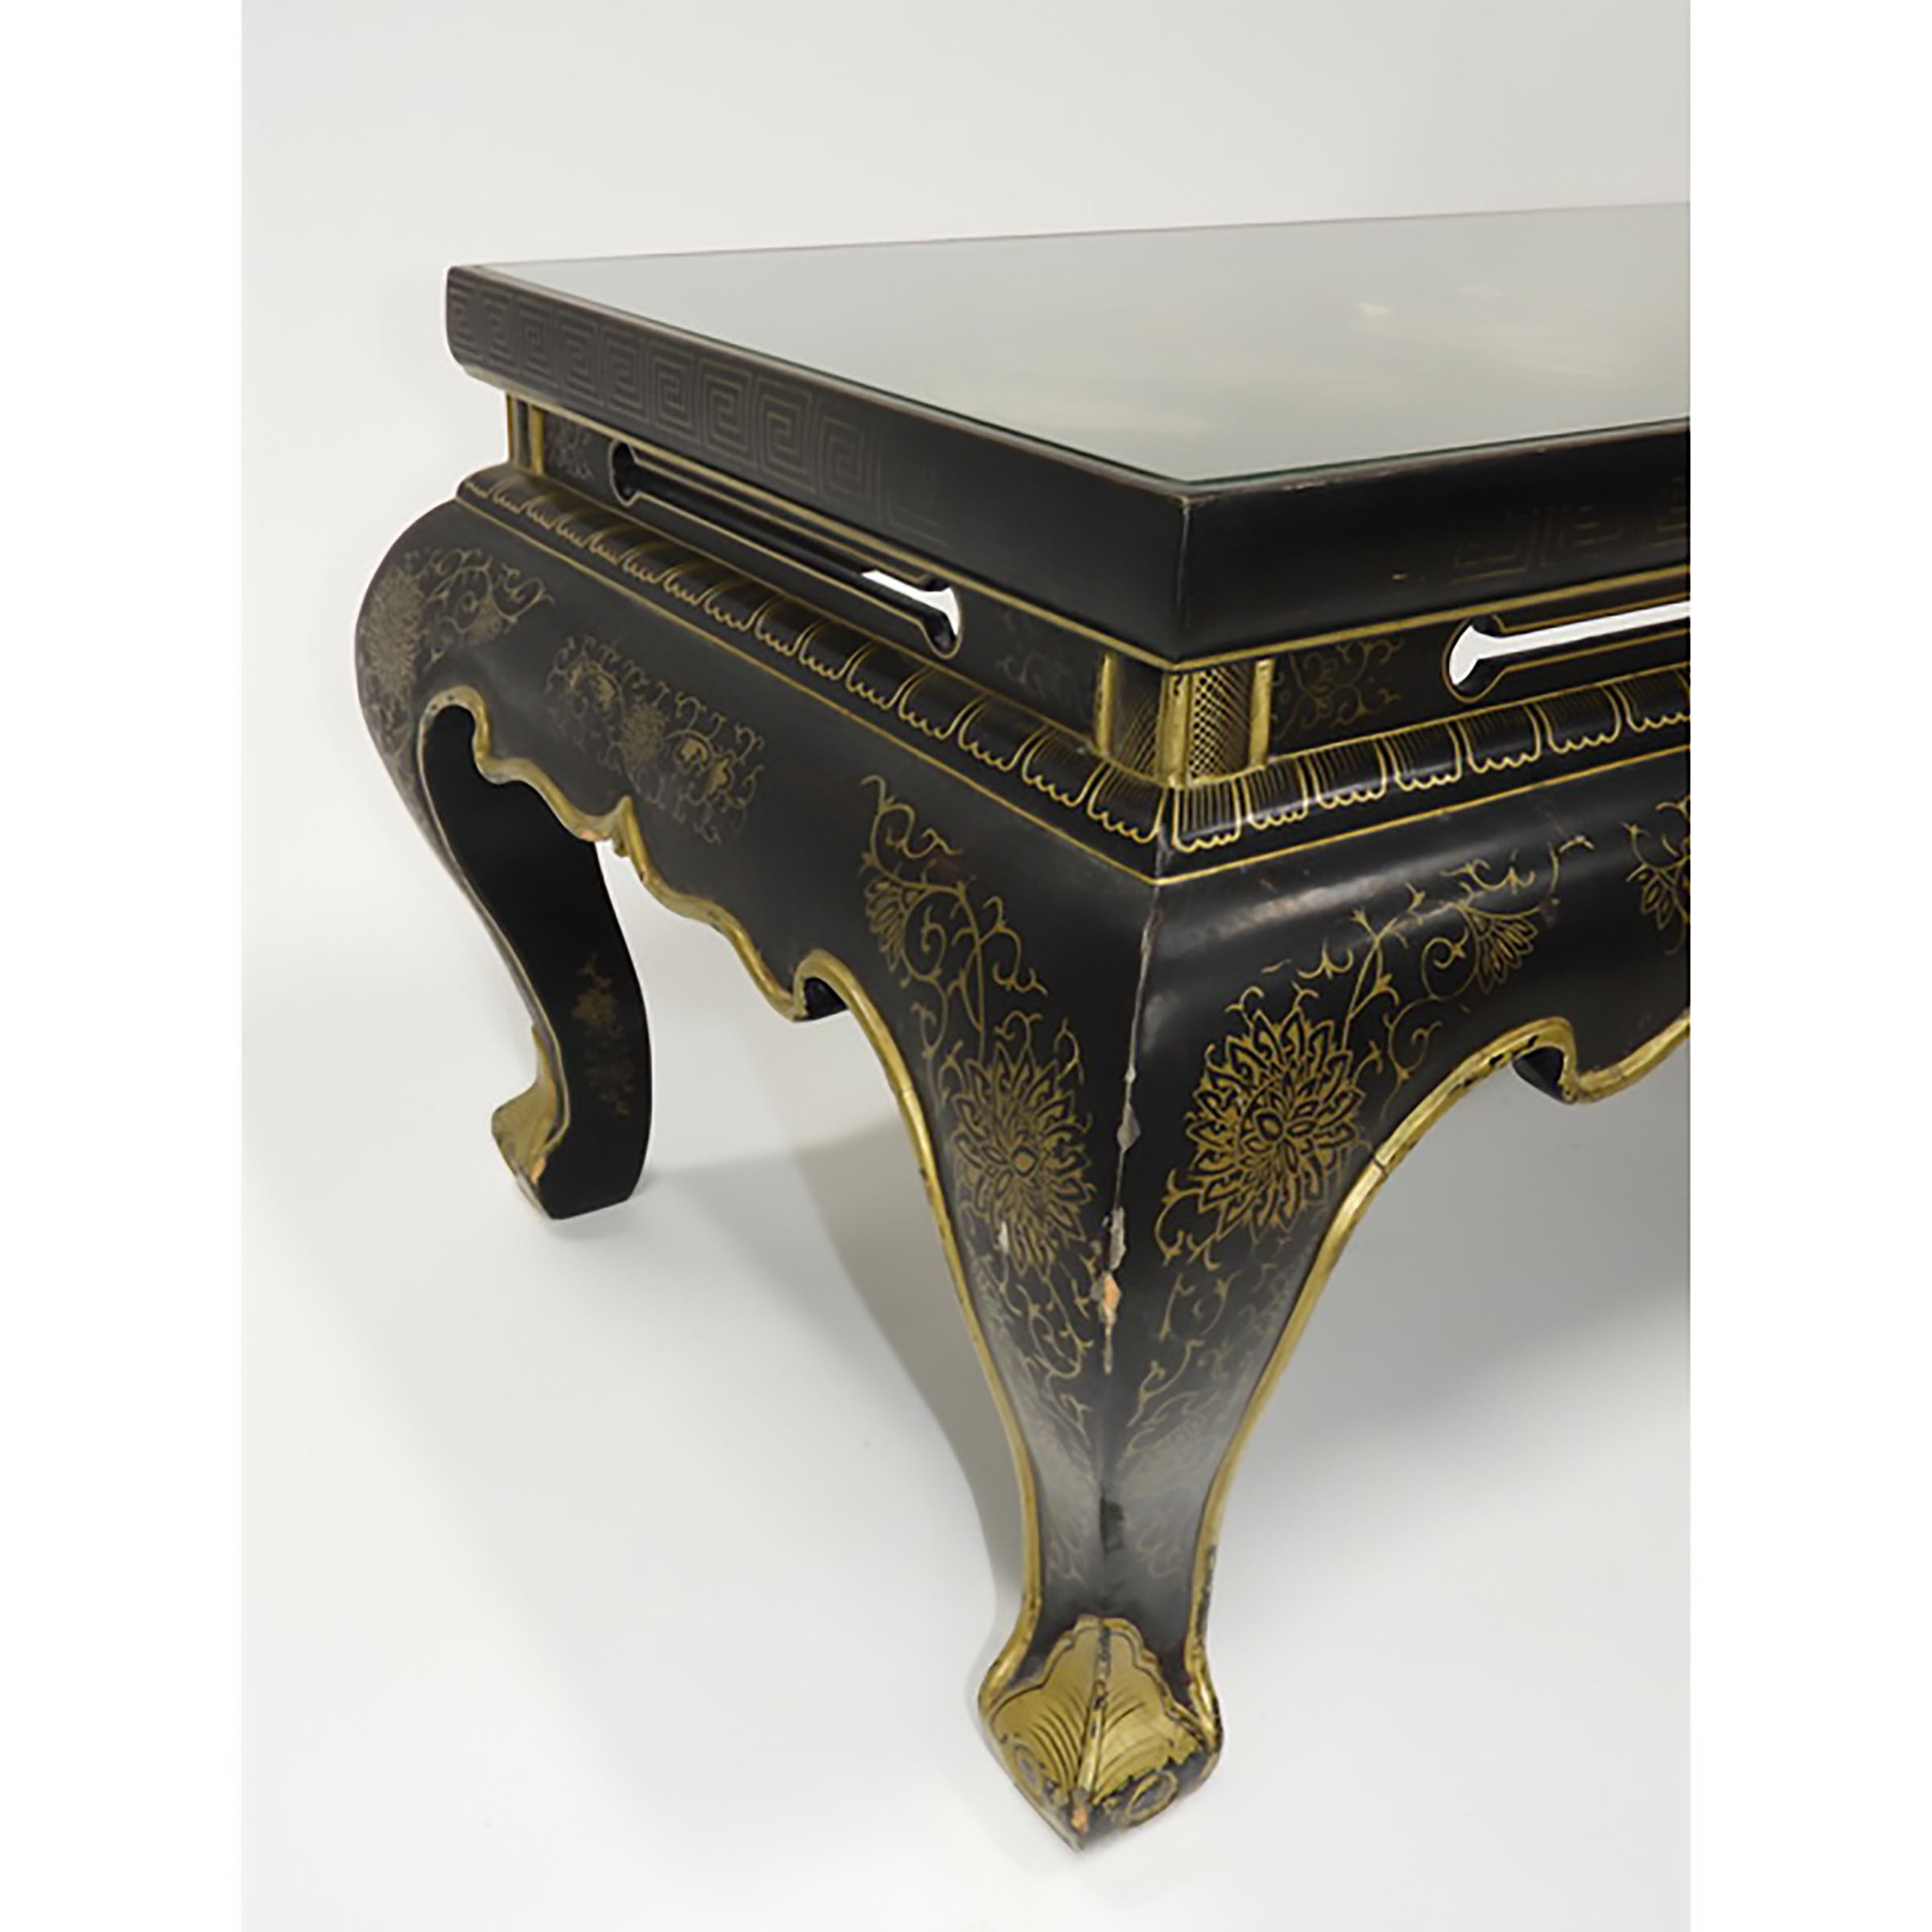 A Chinese Gilded and Lacquered Coffee Table With Glass Top, Early to Mid 20th Century, 民国 描金黑漆人物纹桌, - Image 2 of 6